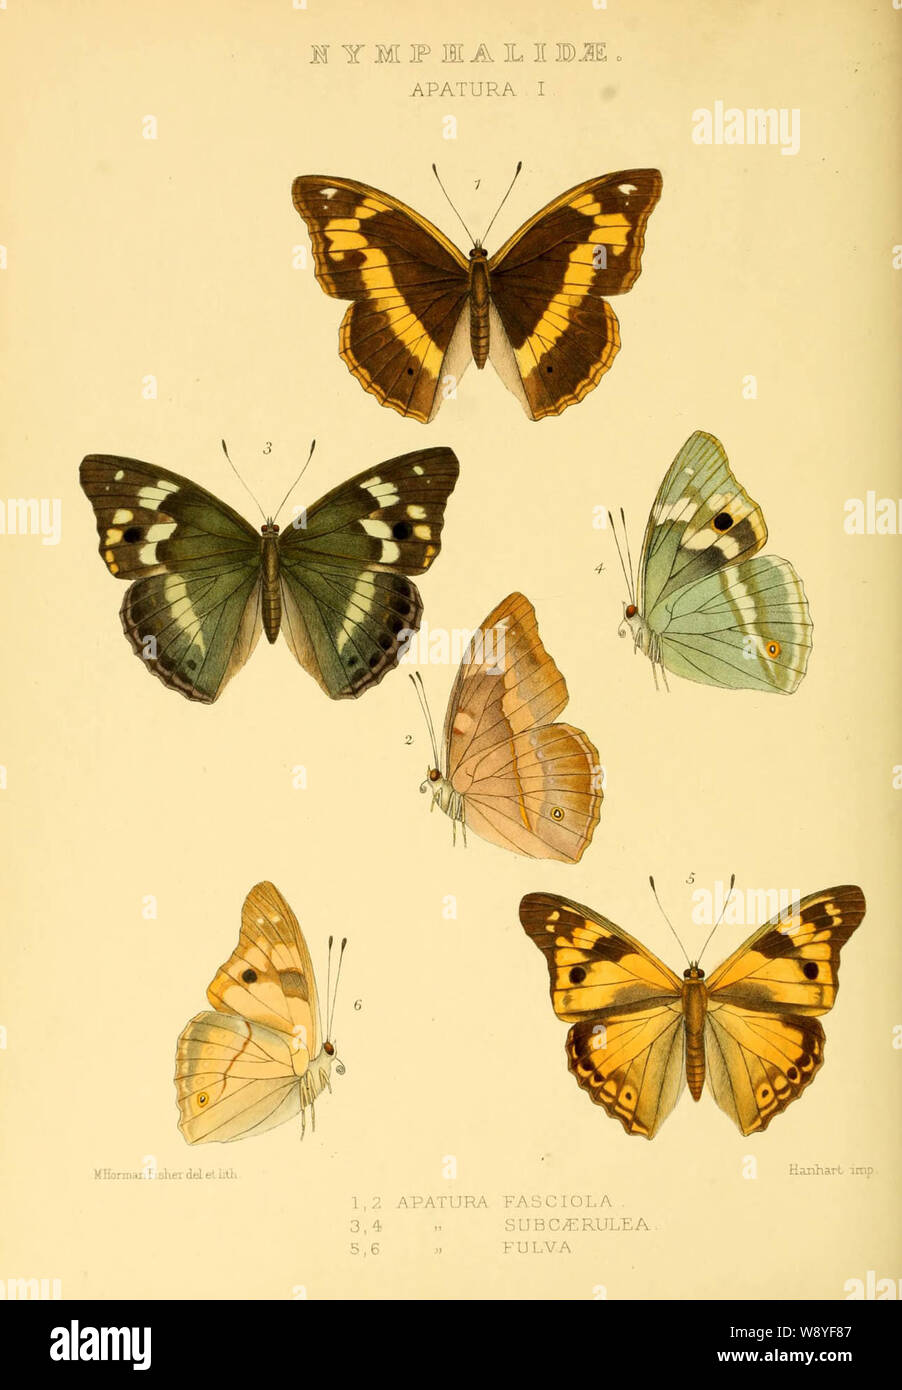 Chitoria fasciola is a species of nymphalid butterfly endemic to China. Stock Photo